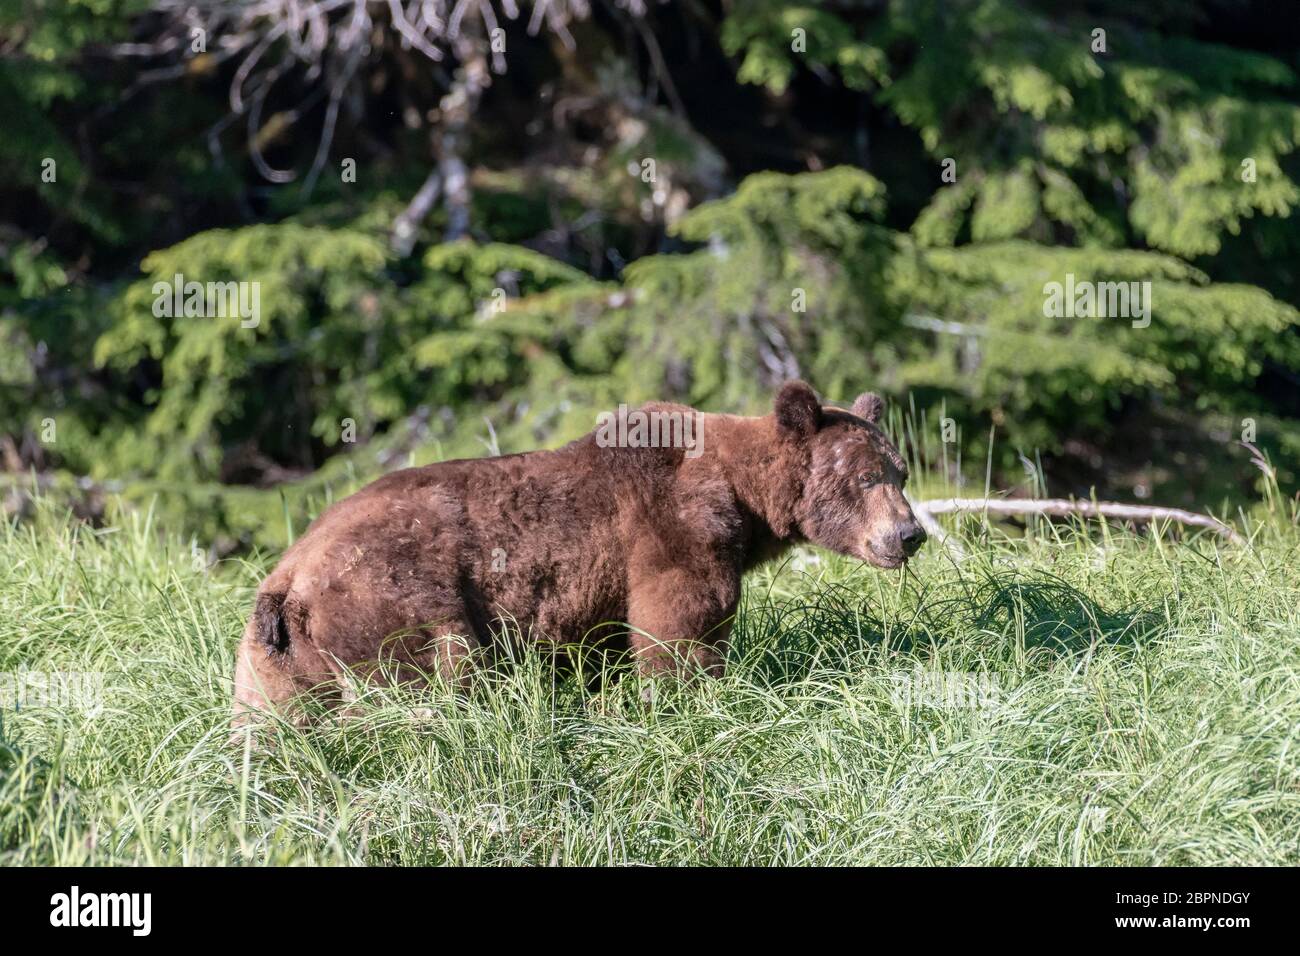 Large grizzly bear in the sedge grass near the rainforest, Khutzeymateen Inlet, BC Stock Photo